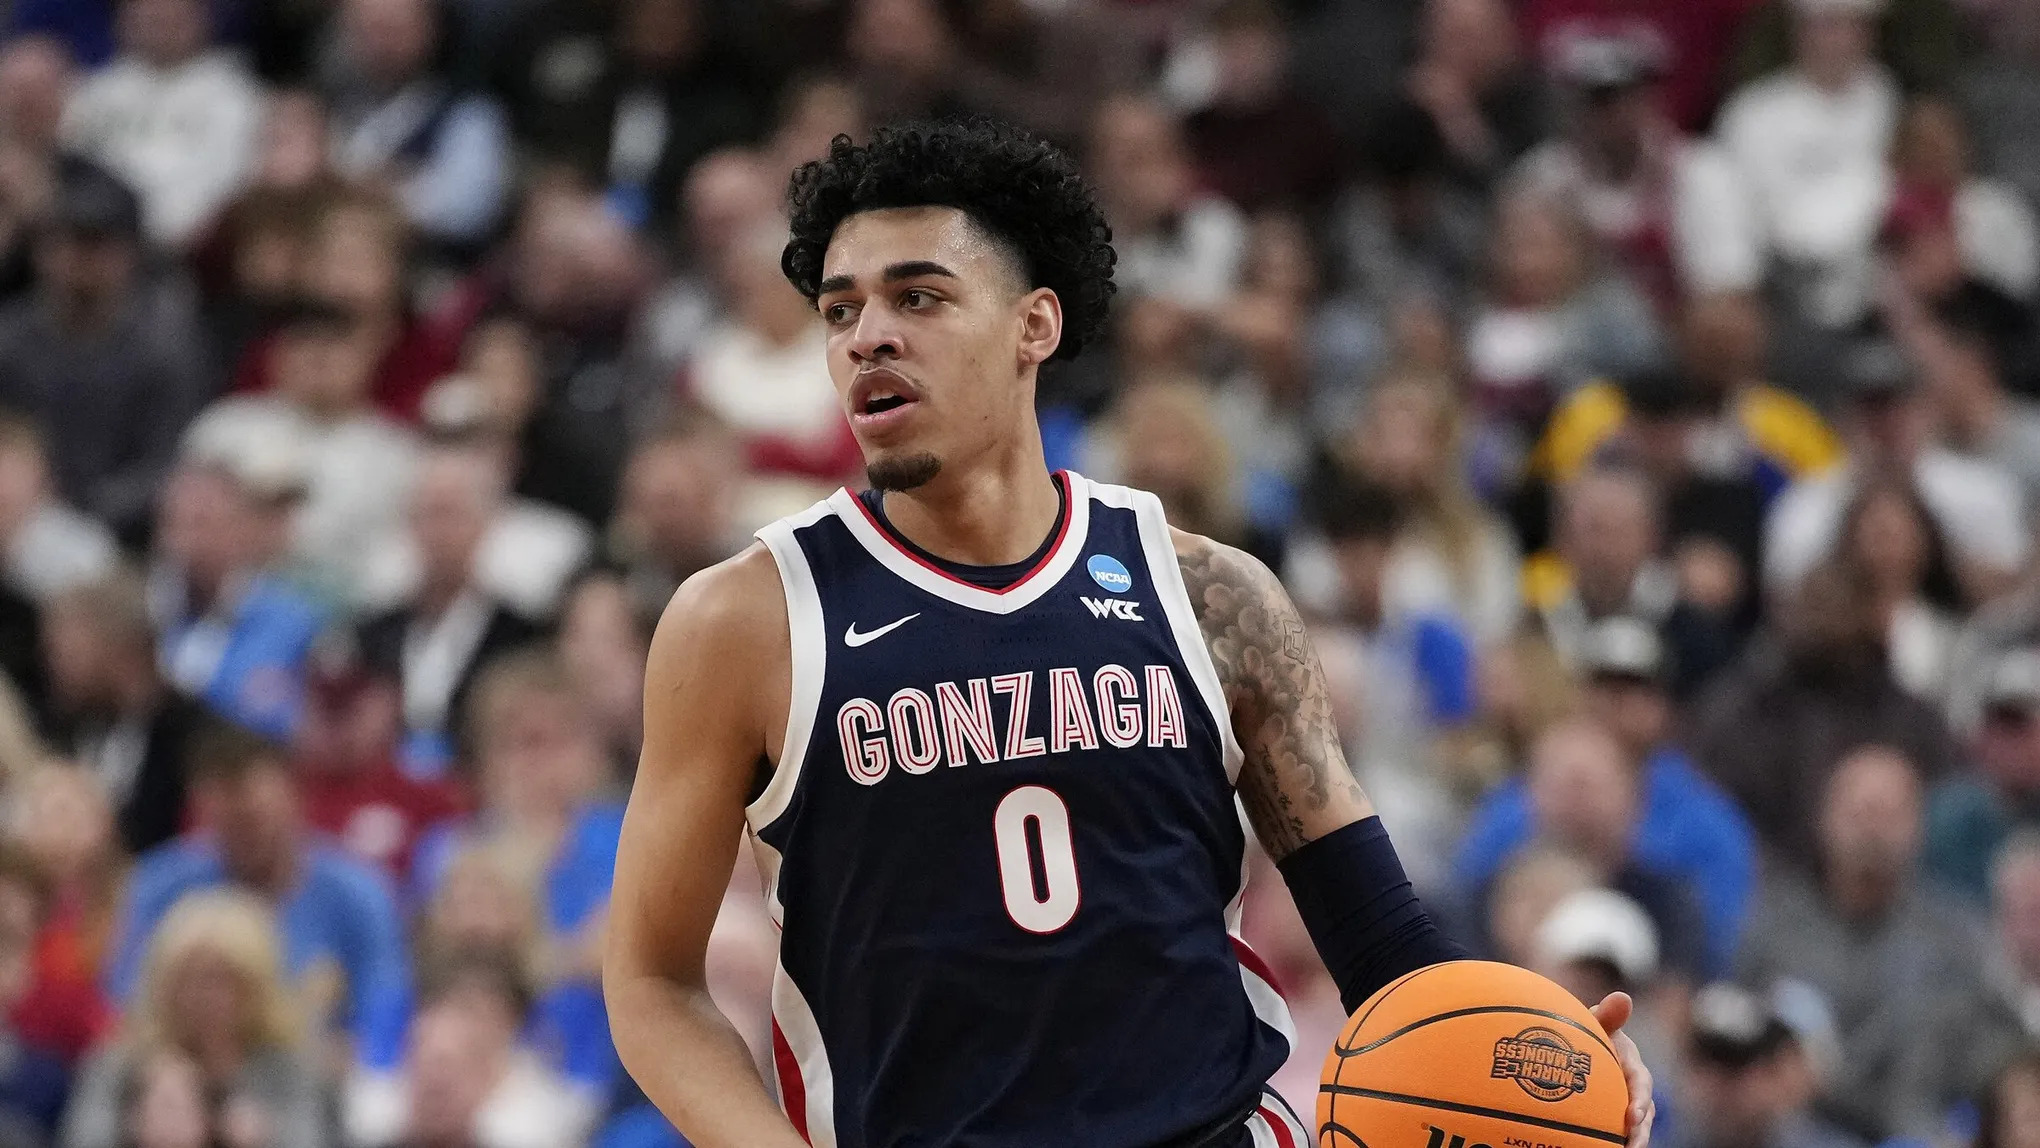 Drew Timme, Julian Strawther among the Zags headed for the NBA